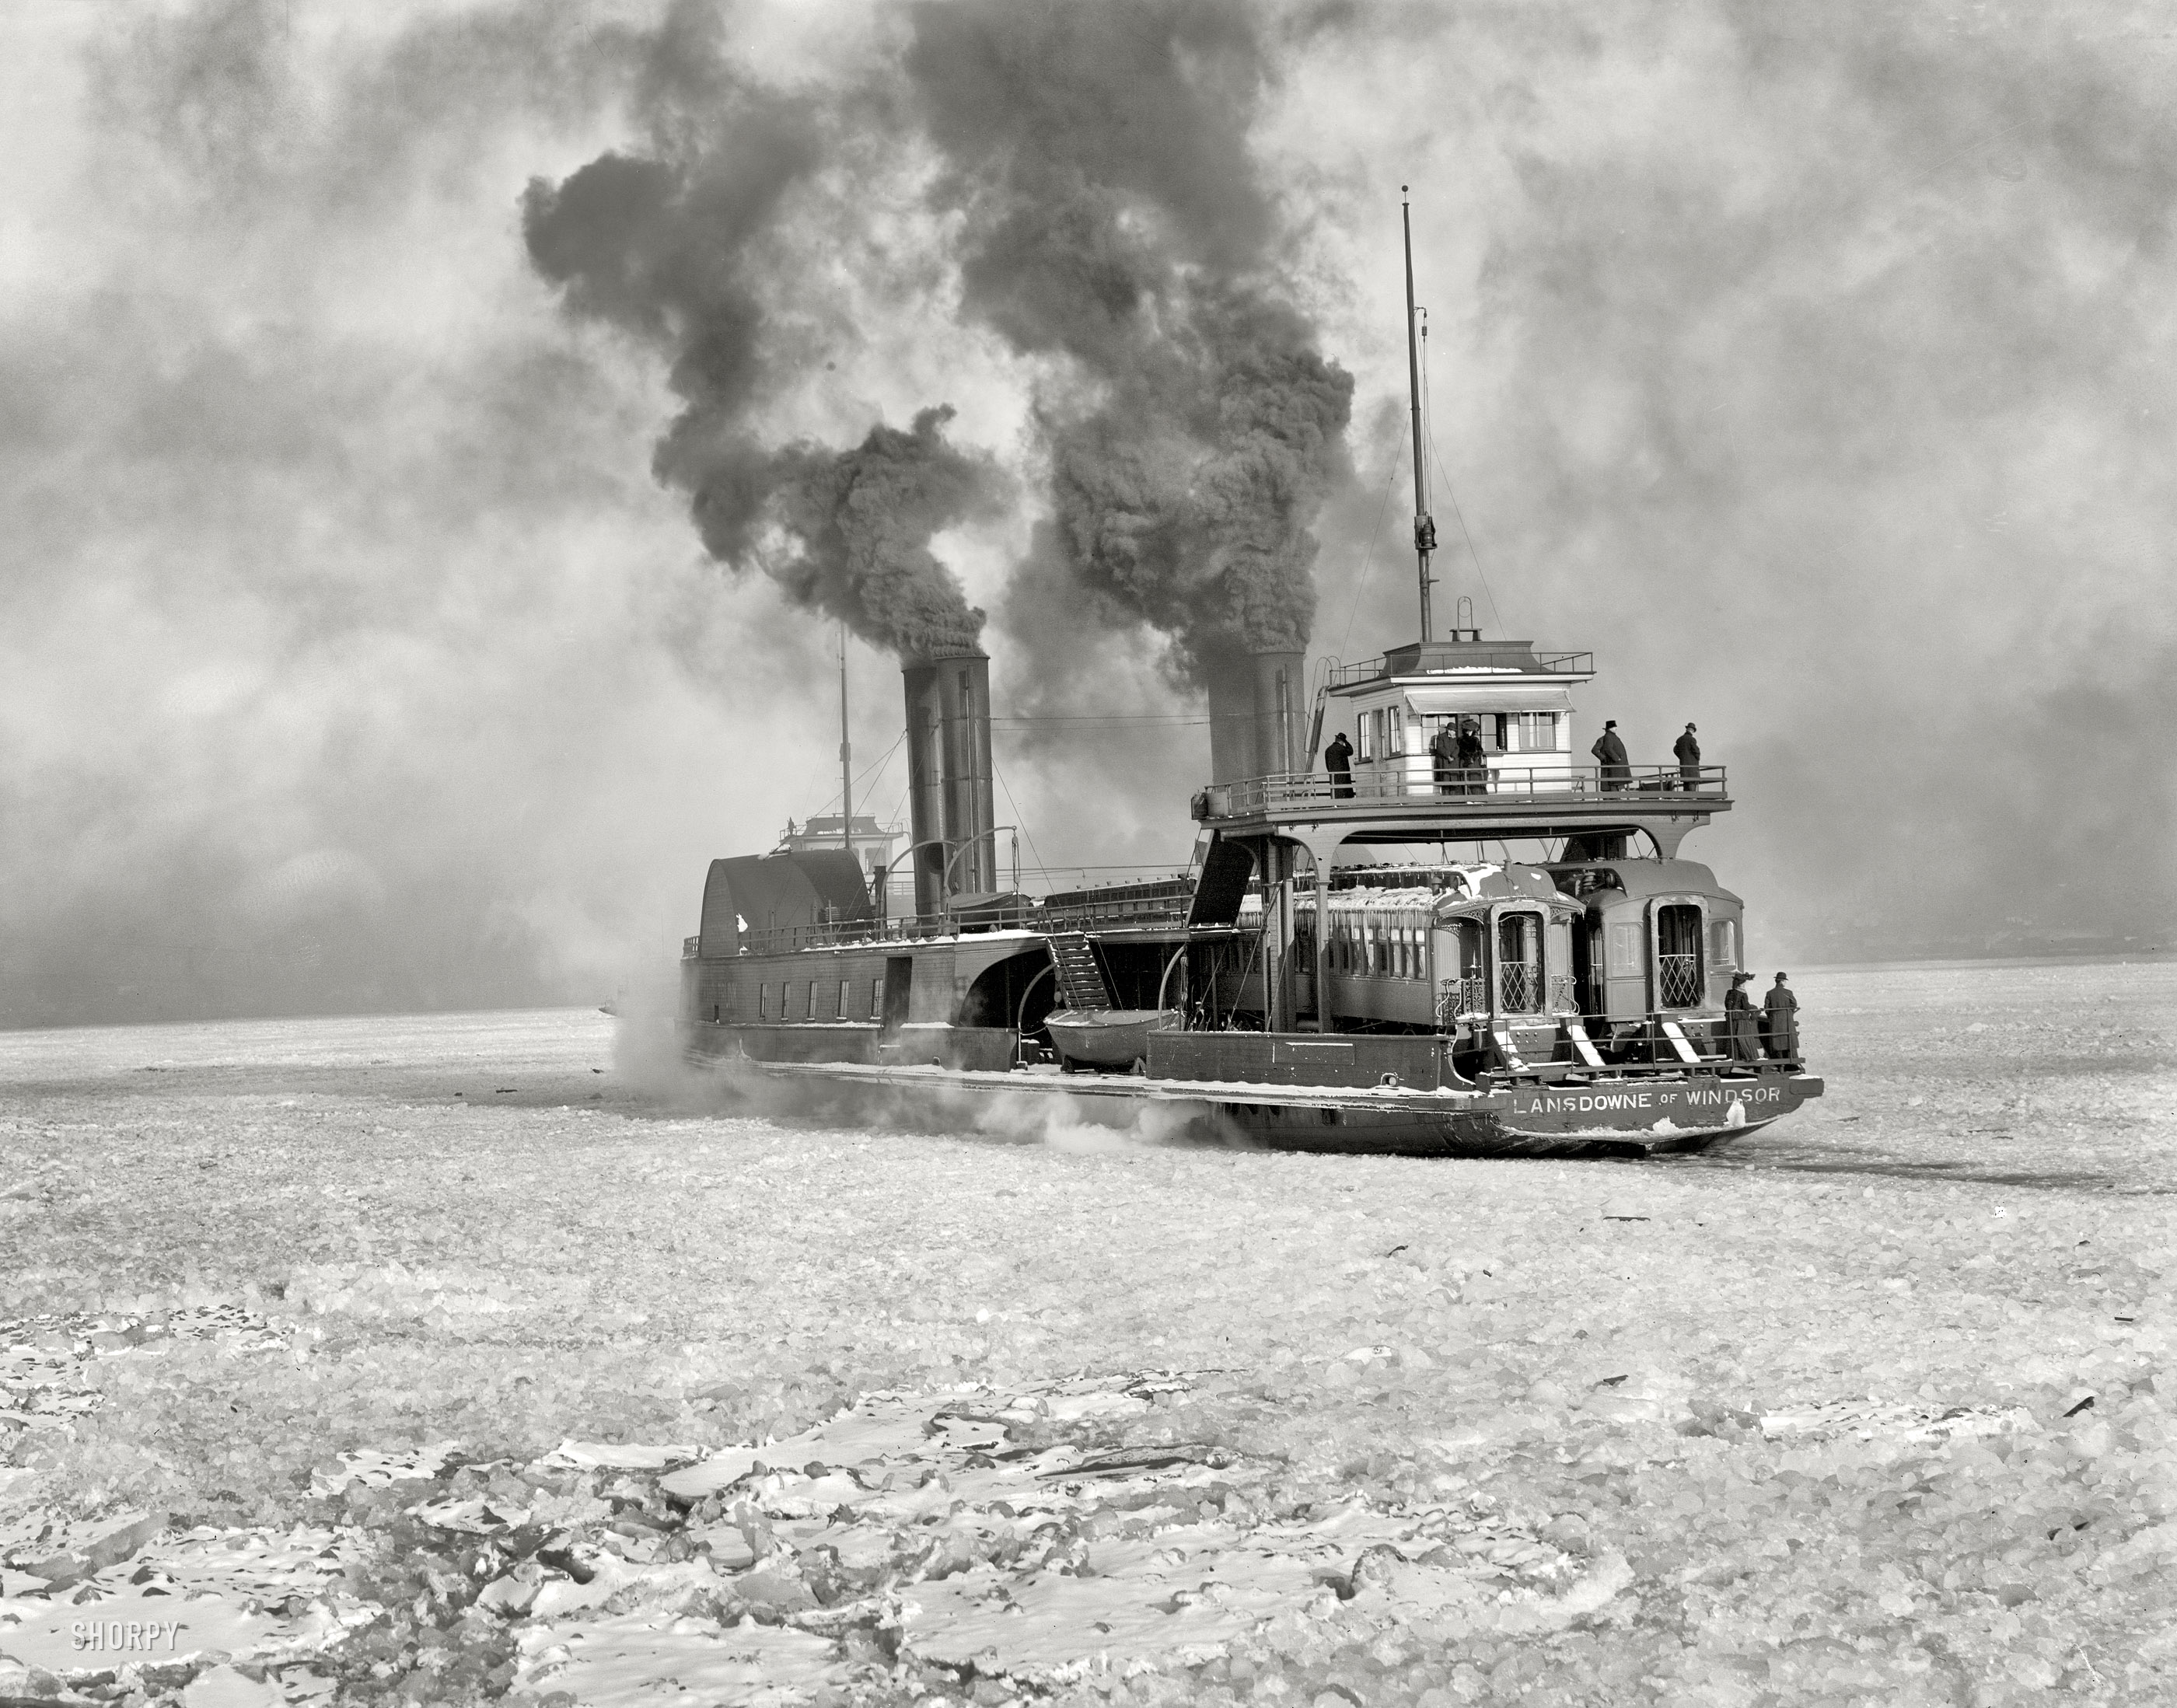 Circa 1905. "Grand Trunk car ferry crossing the Detroit River in winter." 8x10 inch dry plate glass negative, Detroit Publishing Company. View full size.